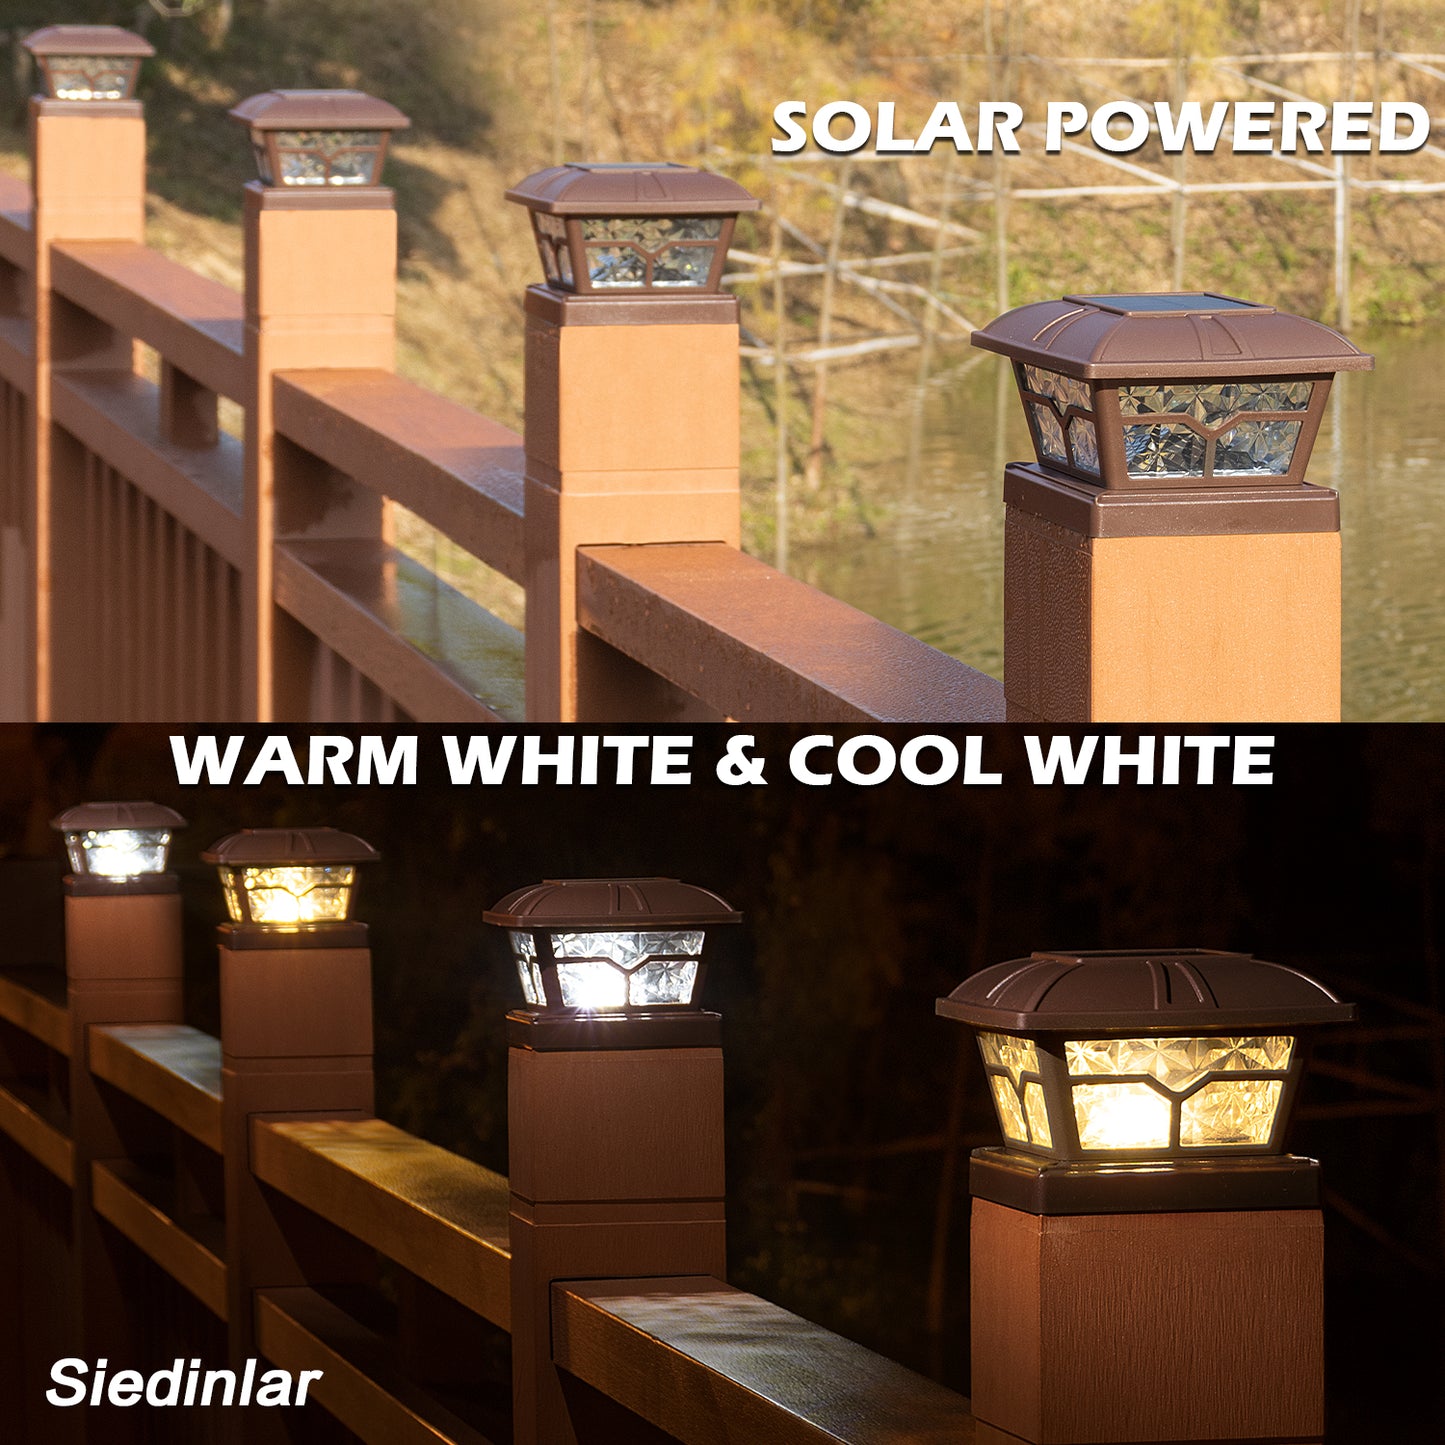 Siedinlar SD020Z Solar Post Cap Lights Outdoor 2 Color Modes 8 LEDs for 4x4 5x5 6x6 Posts Fence Deck Patio Decoration Warm White & Cool White Lighting Brown (4 Pack)